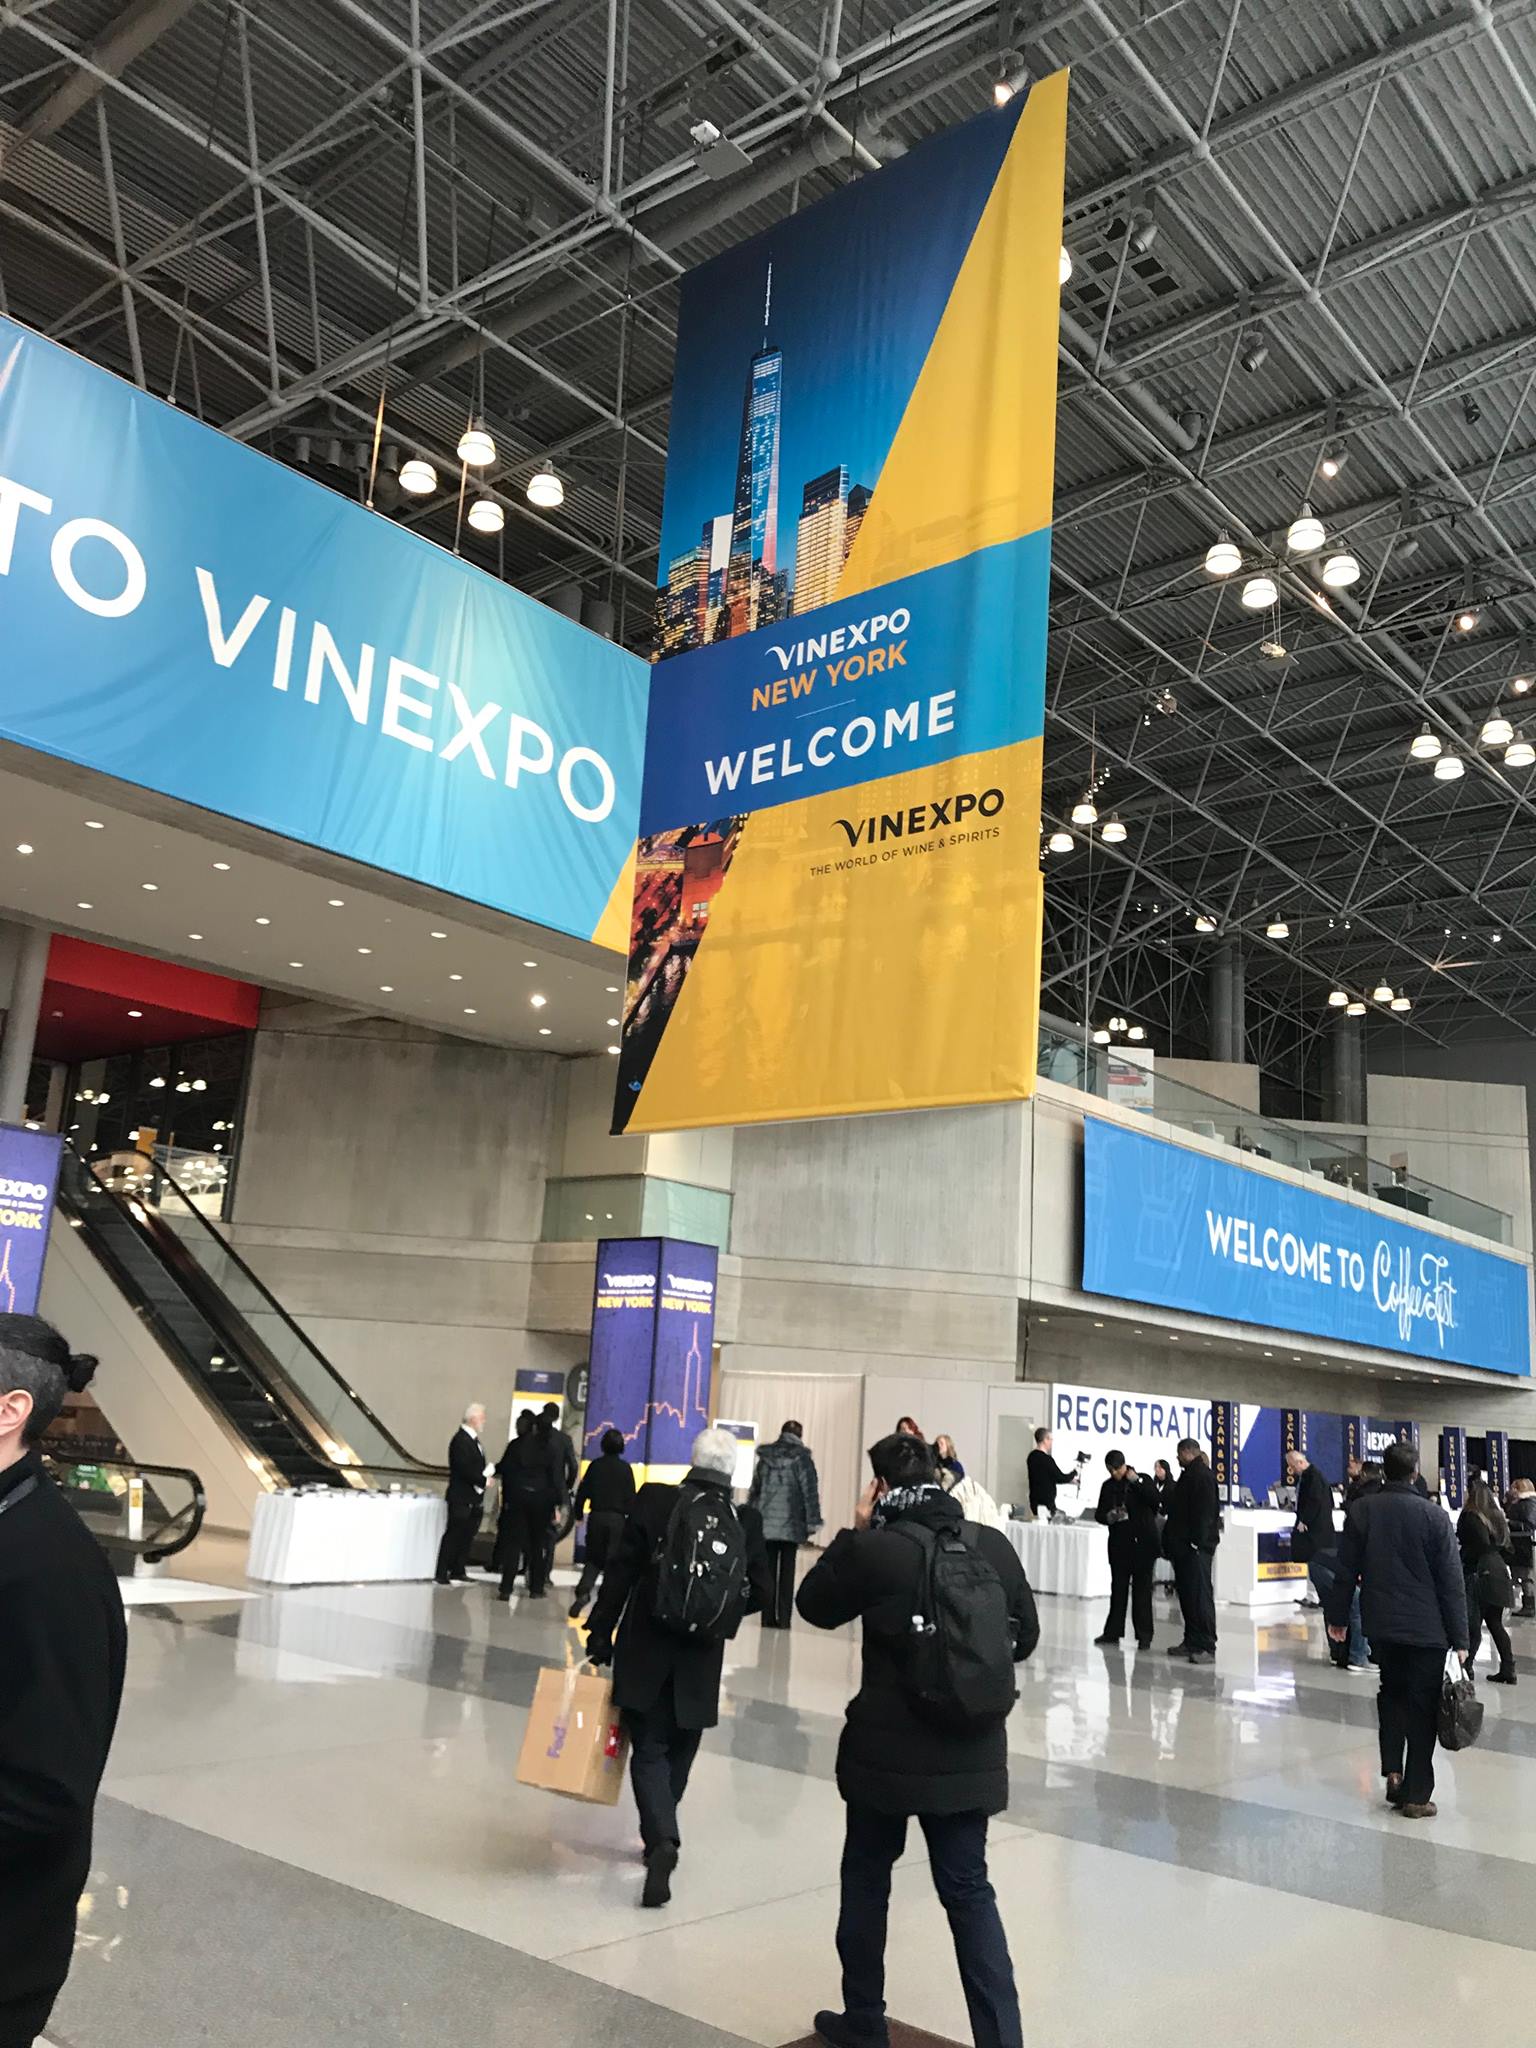 Vinexpo NY 2019: A great success that confirms the strength of this fair!